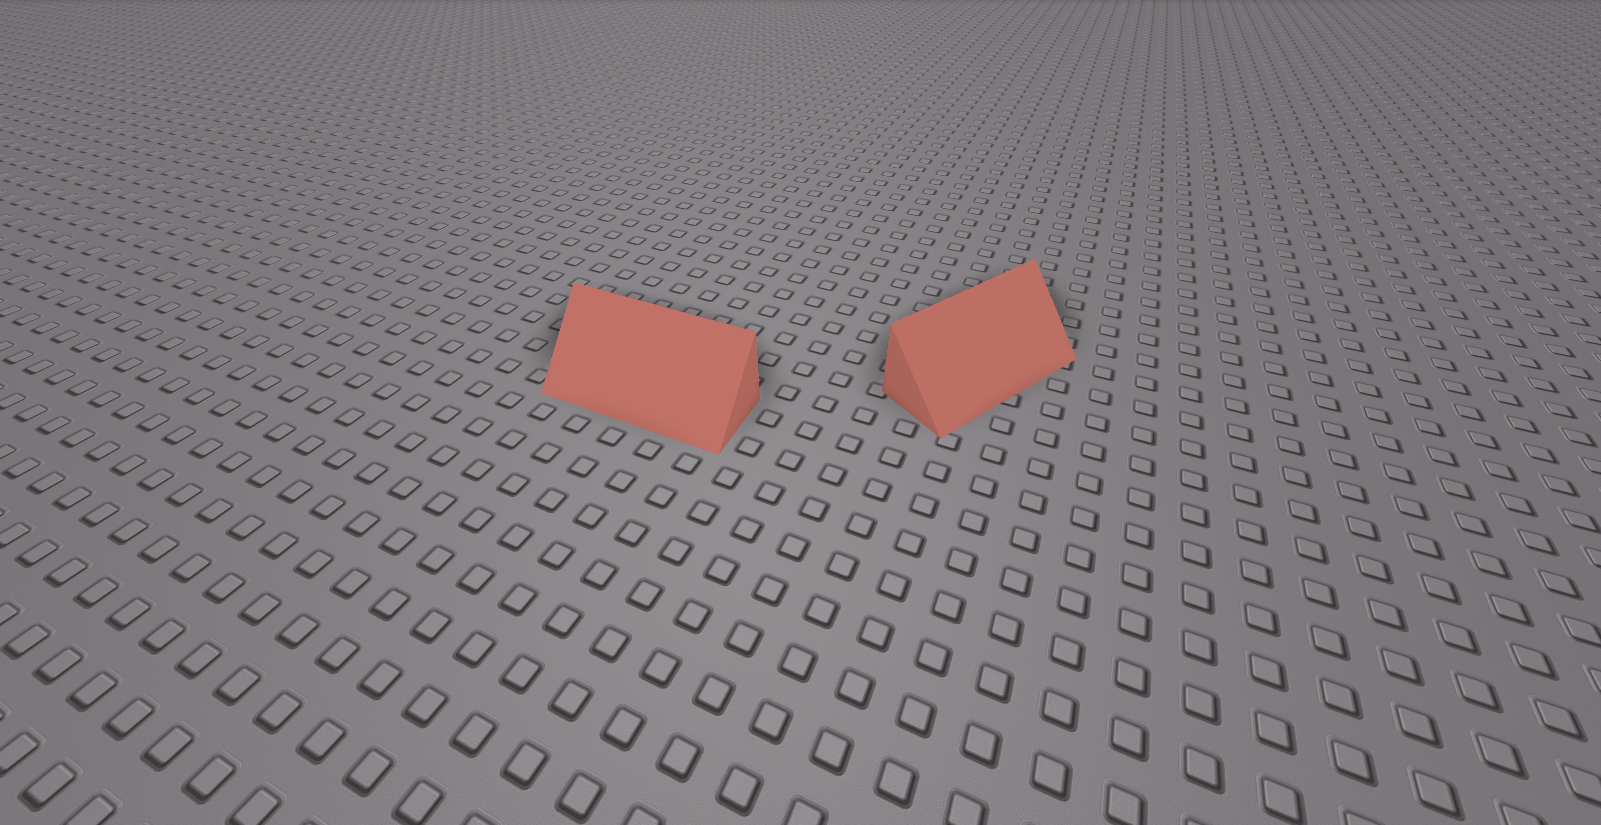 Top 10 Best Plugins On Roblox Exactly As The Tile Says In This Post By Molegul Medium - how to spawn with building tools like the roblox building